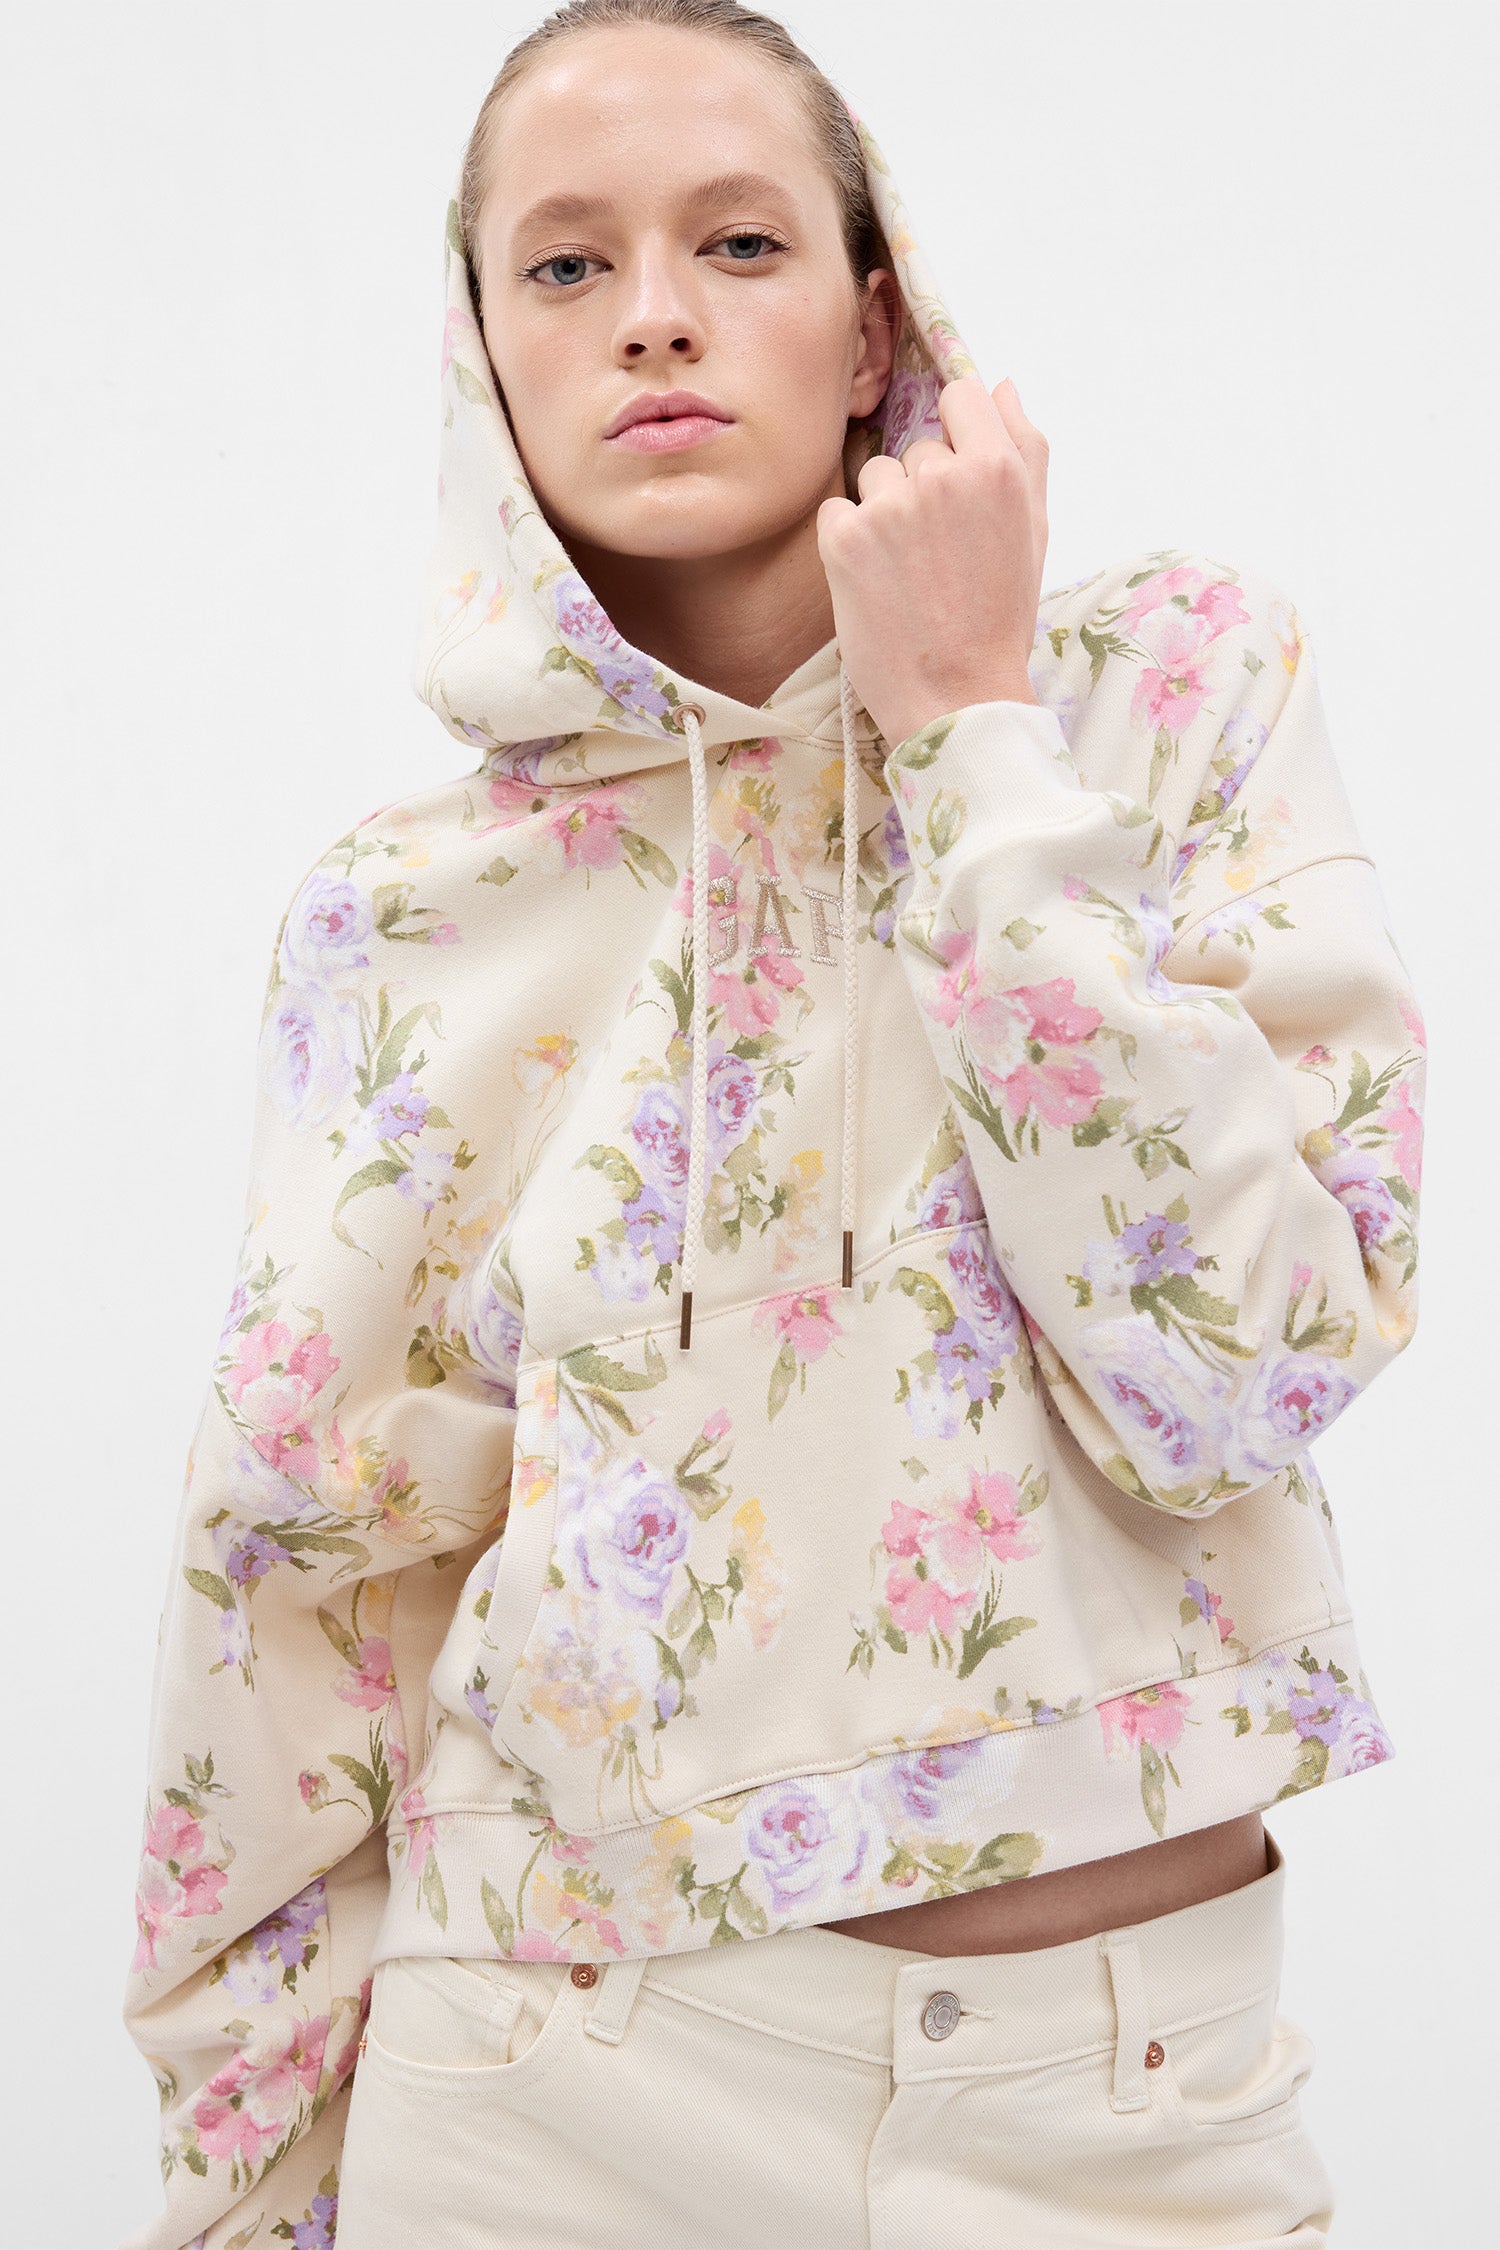 Model wearing cream floral hoodie with GAP arch logo on chest and pink, purple, and green floral print